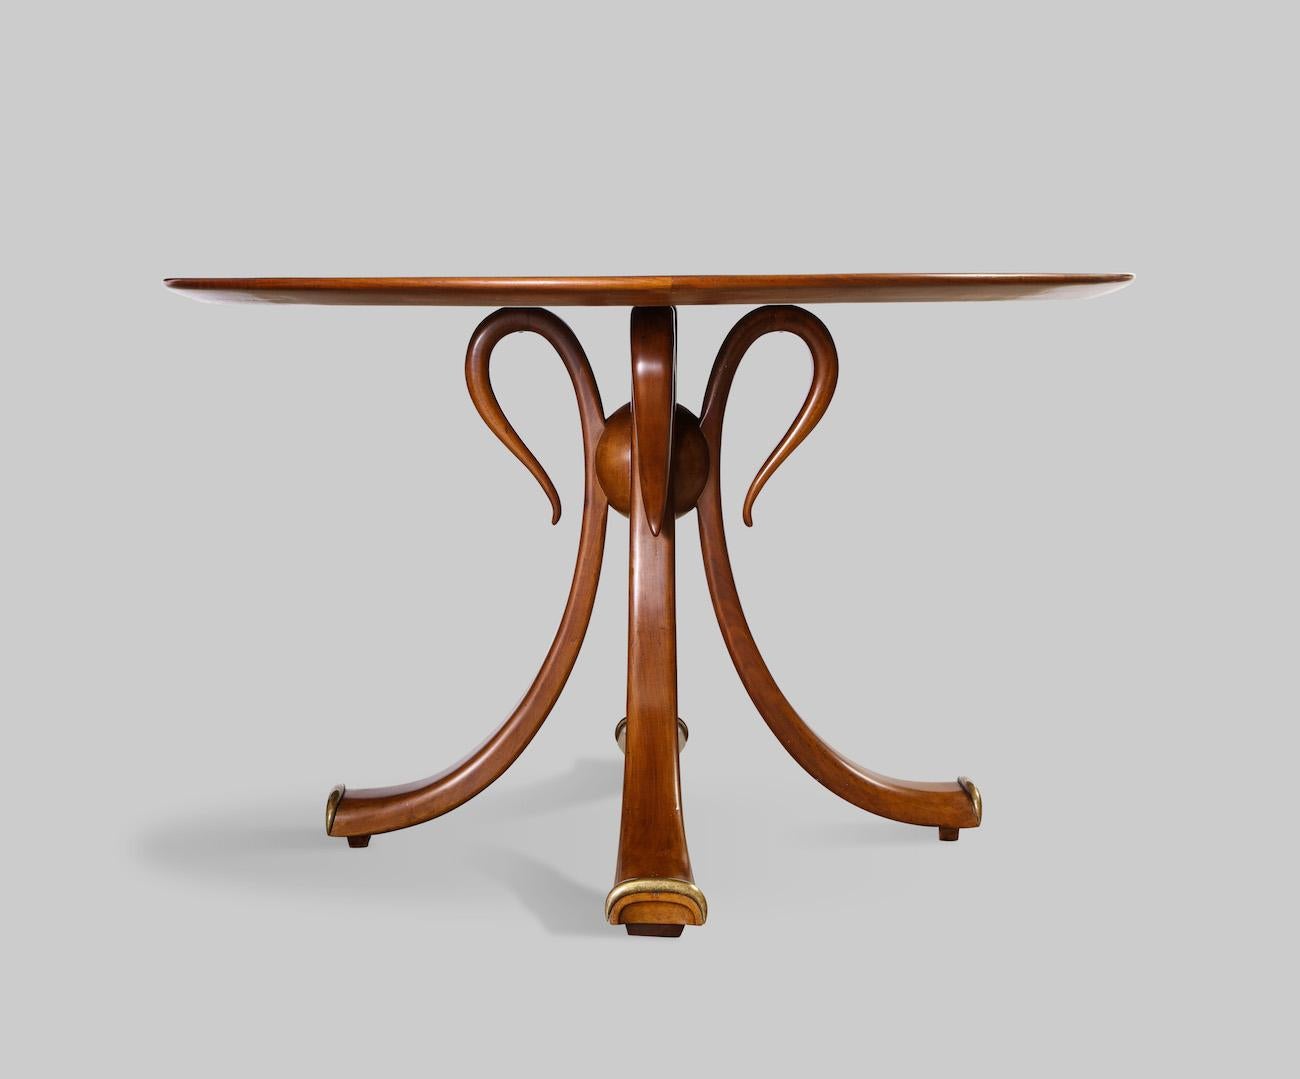 Rare center/ games table, by Osvaldo Borsani. Walnut pedestal table of 4 curved wood fronds with brass trim at feet. Solid center wood ball and radius veneered circular top. Produced by Arredamenti Borsani Varedo with label to underside of top.